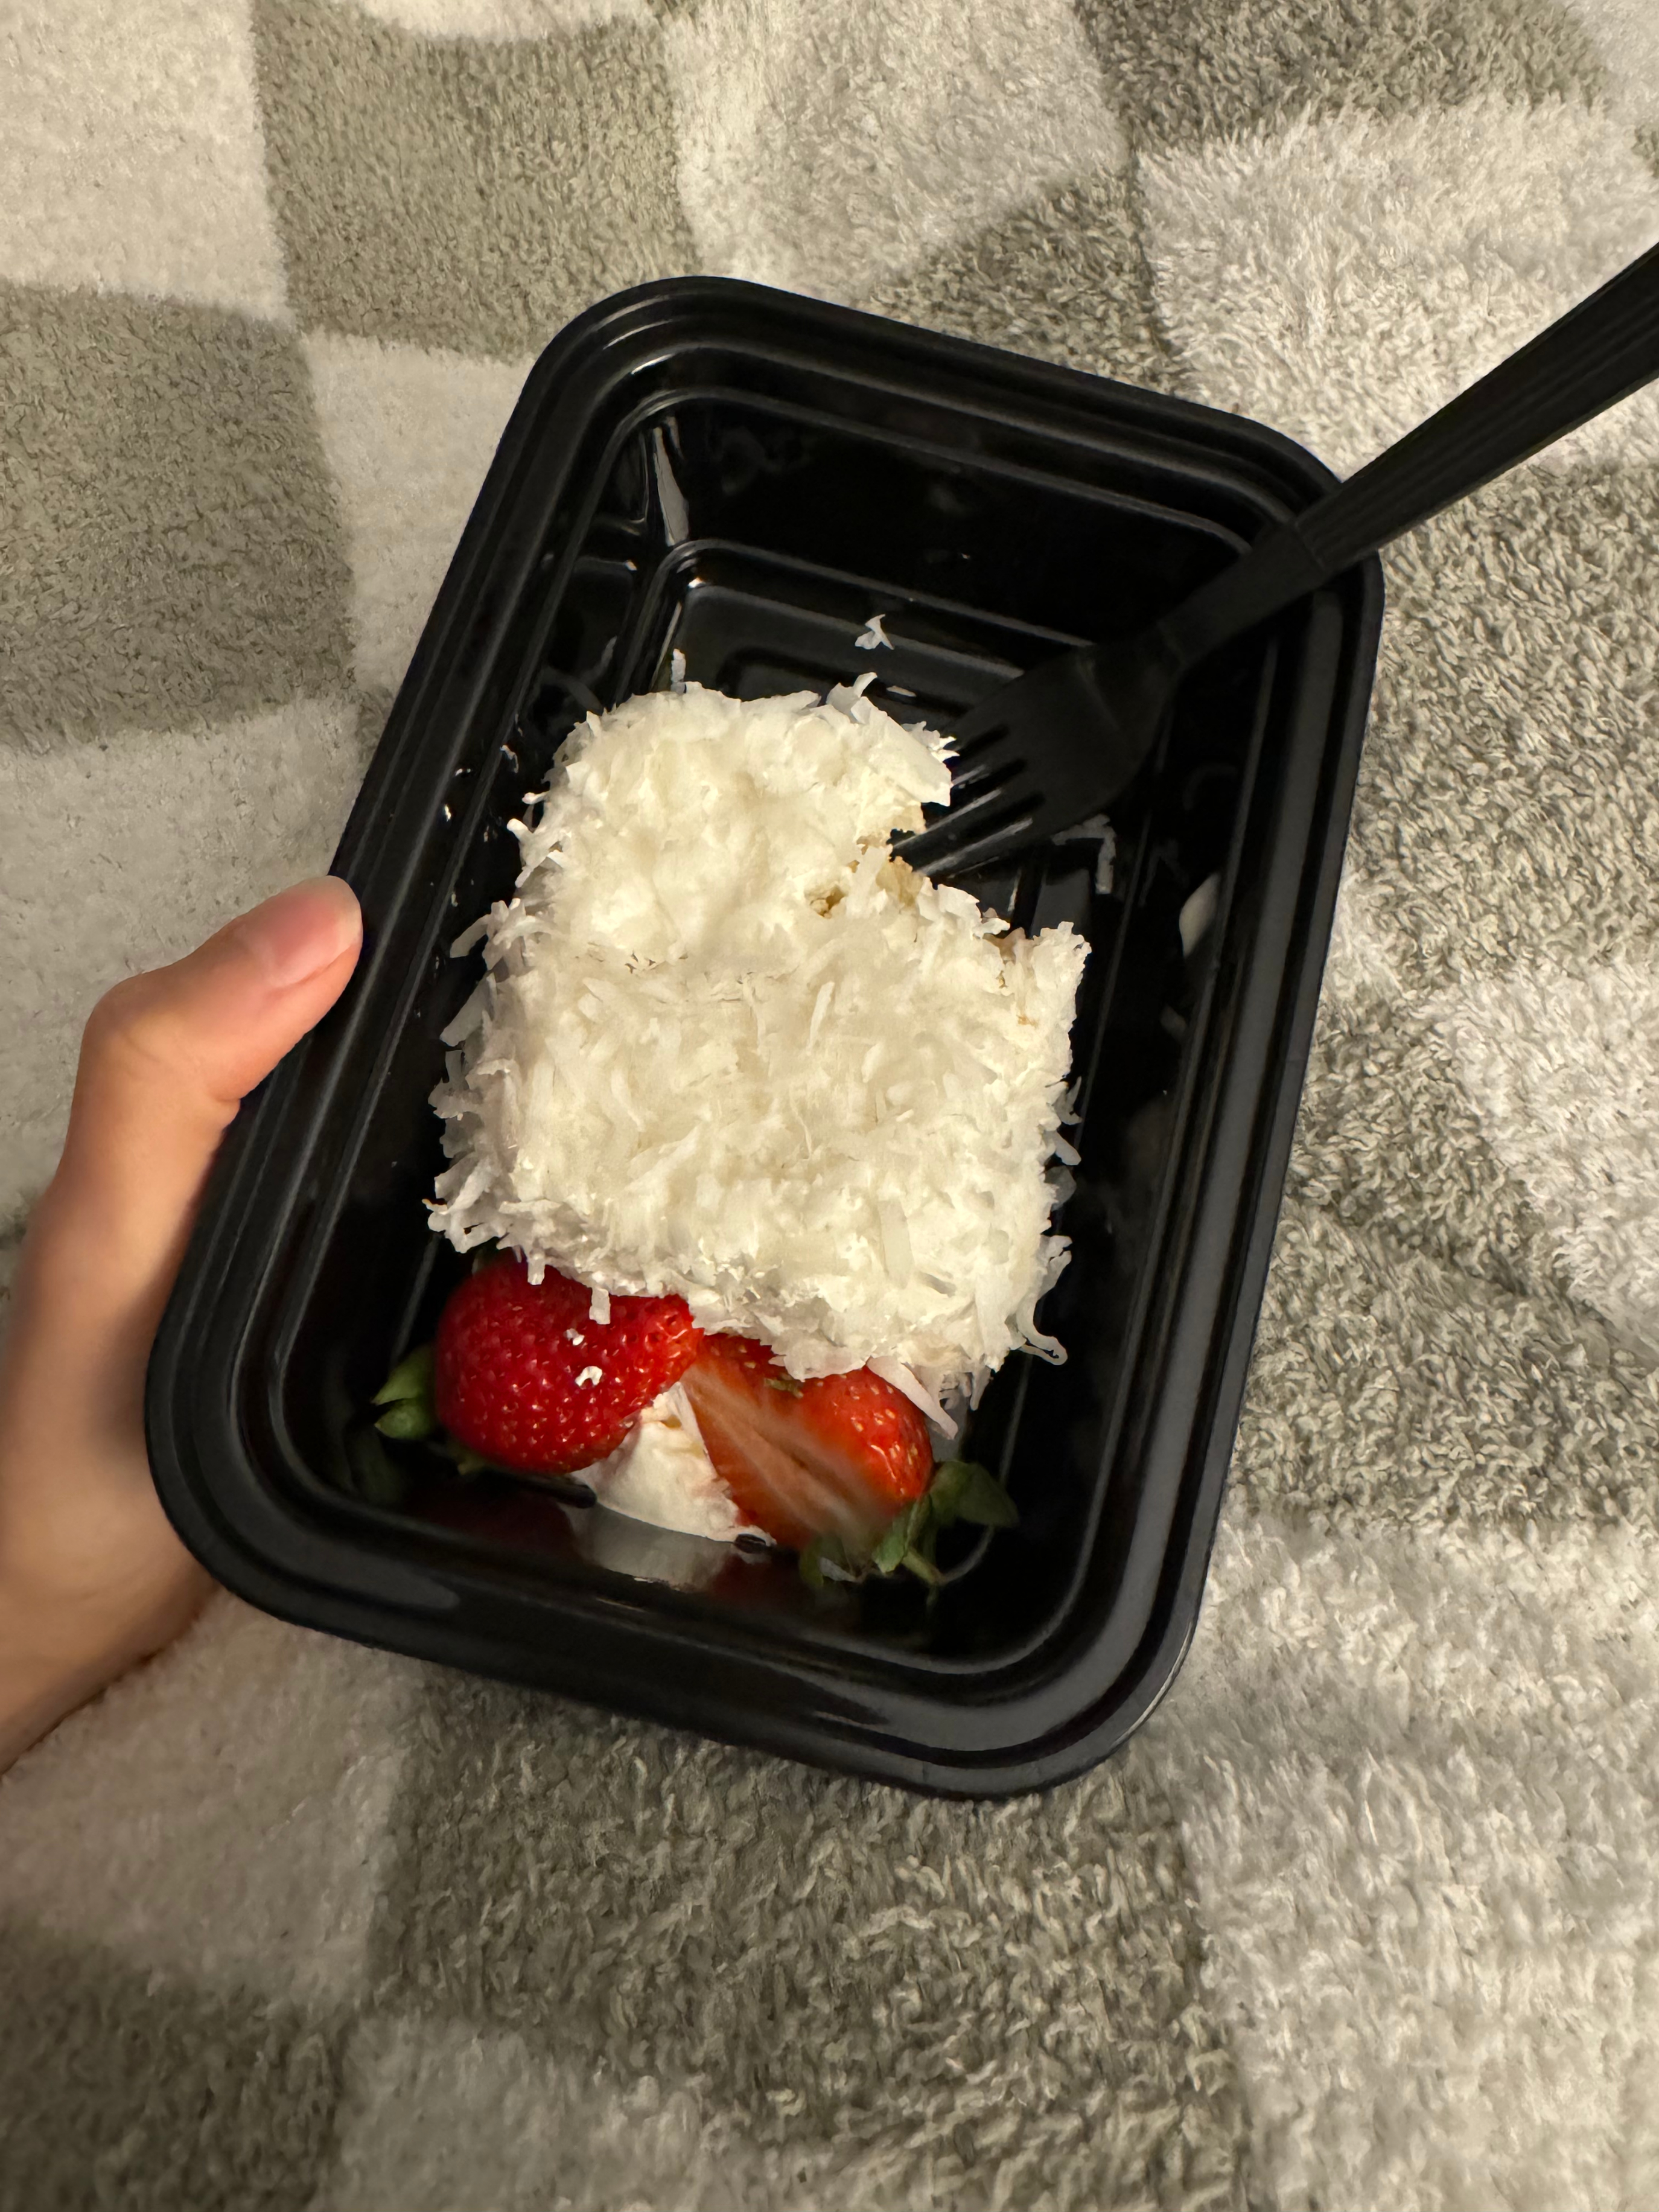 Hand holding a container with a dessert of strawberries topped with shredded coconut